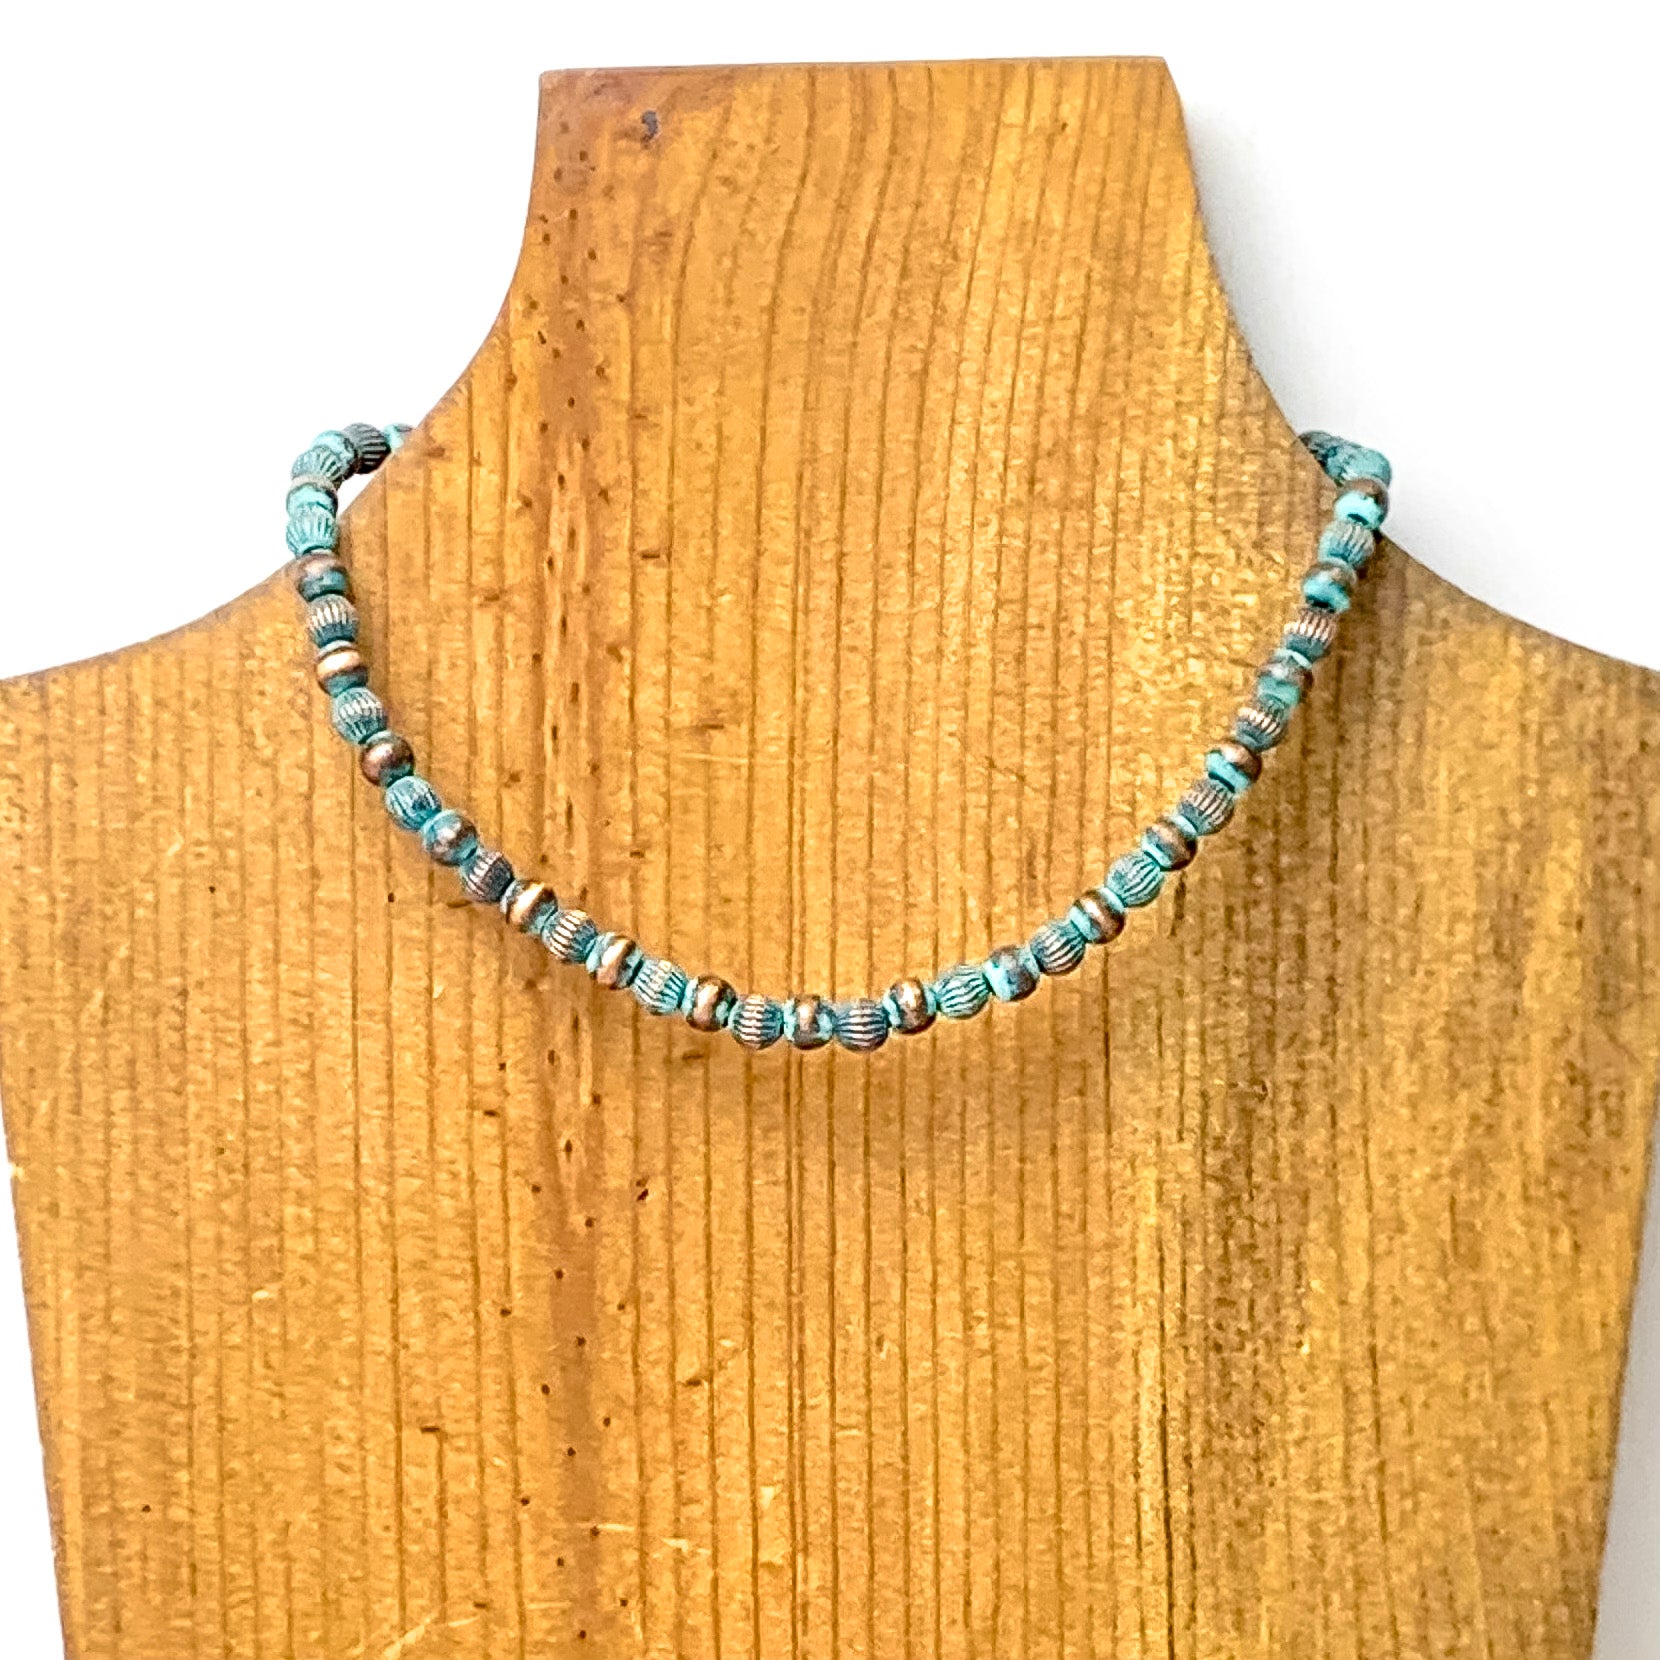 Faux Navajo Pearl Choker Necklace with Corrugated Spacers in Patina Tone - Giddy Up Glamour Boutique